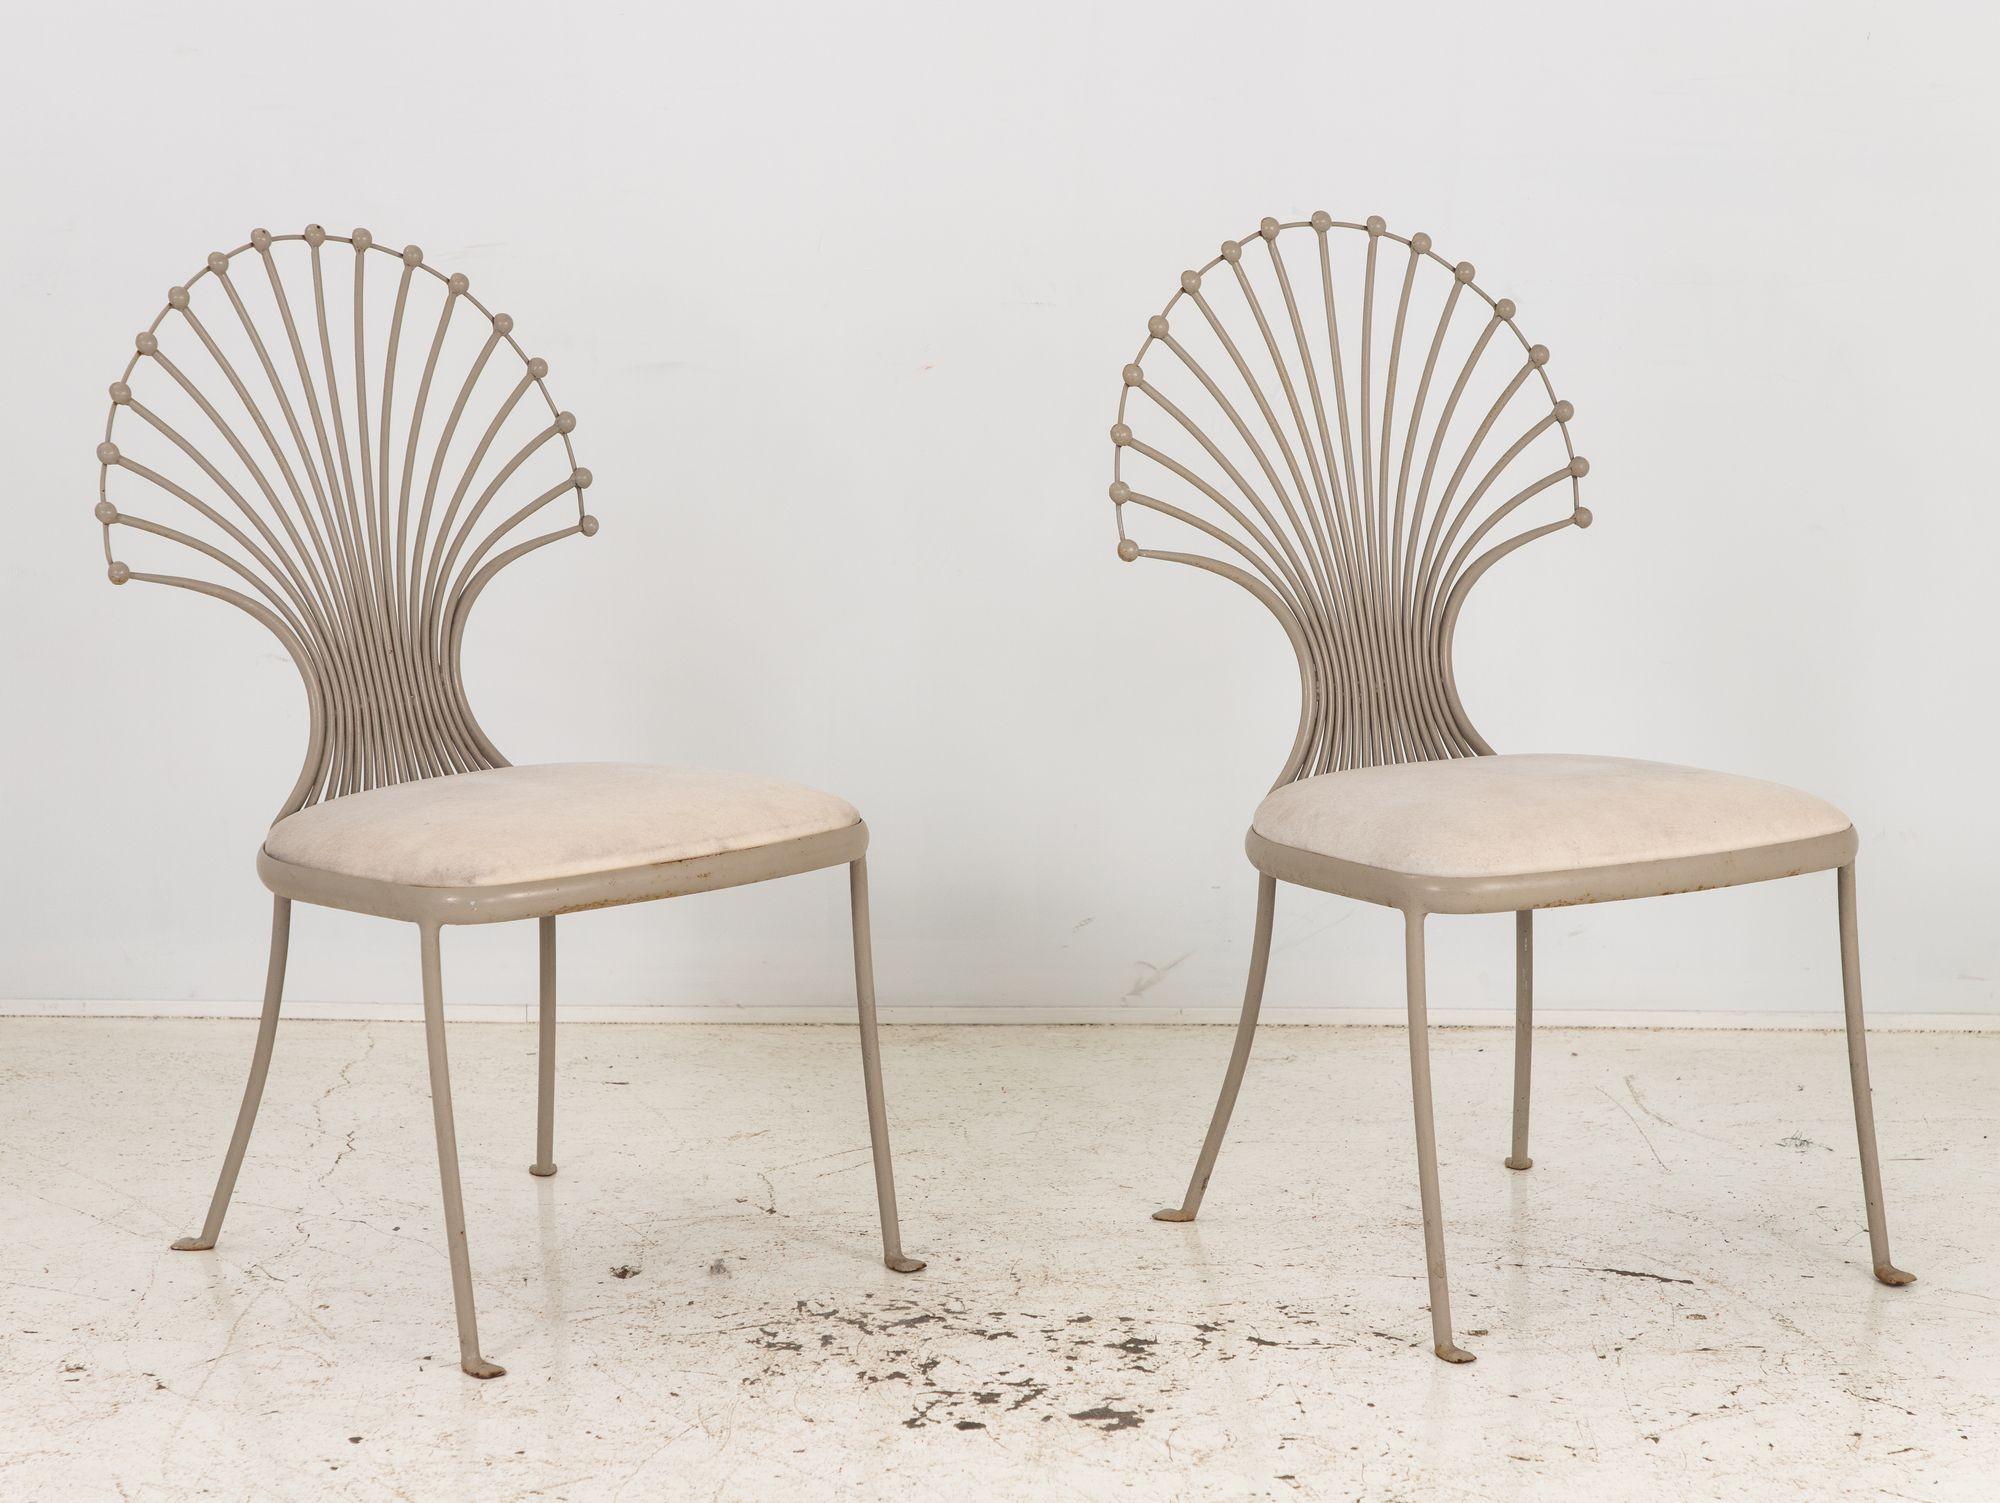 Pair Side Chairs with Peacock or Wheat Sheaf Motif, Gray Painted Aluminum 1